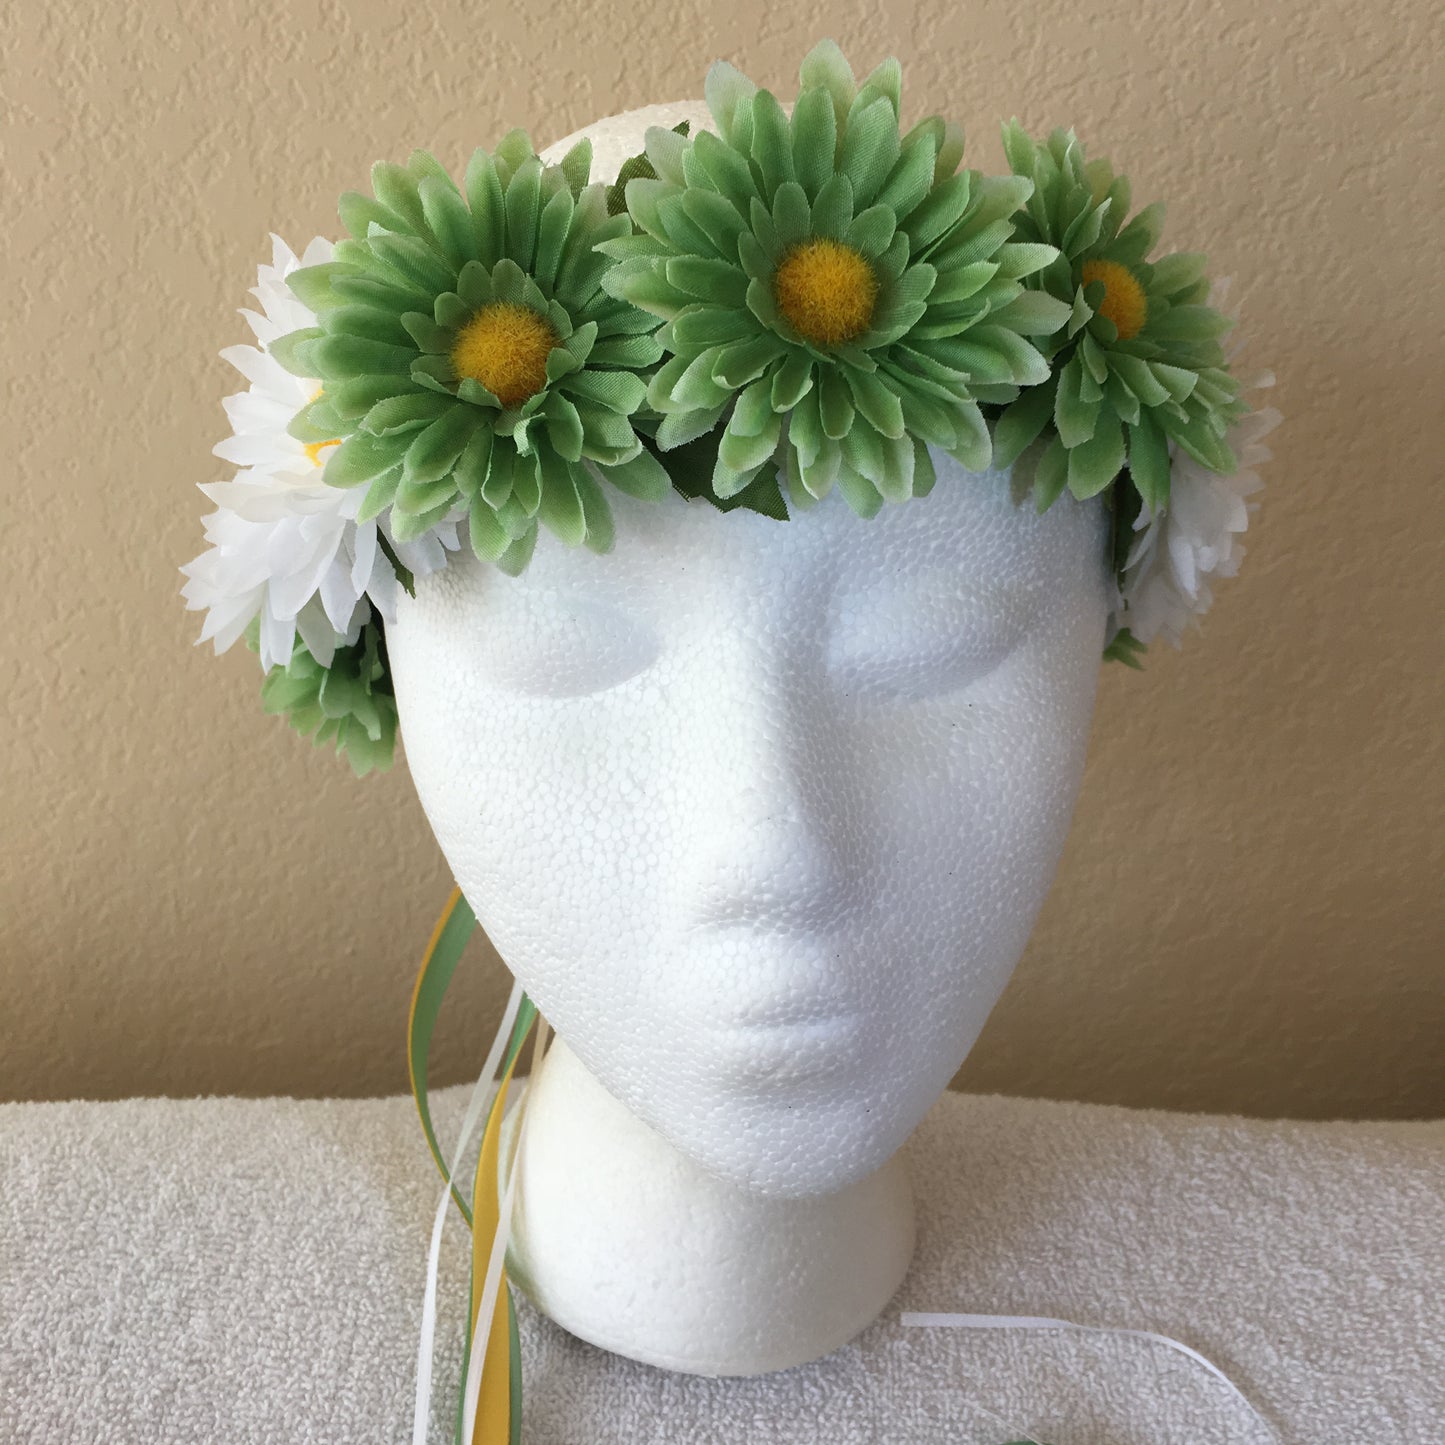 Small Wreath - Three center mint green daisies w/ daisies accents